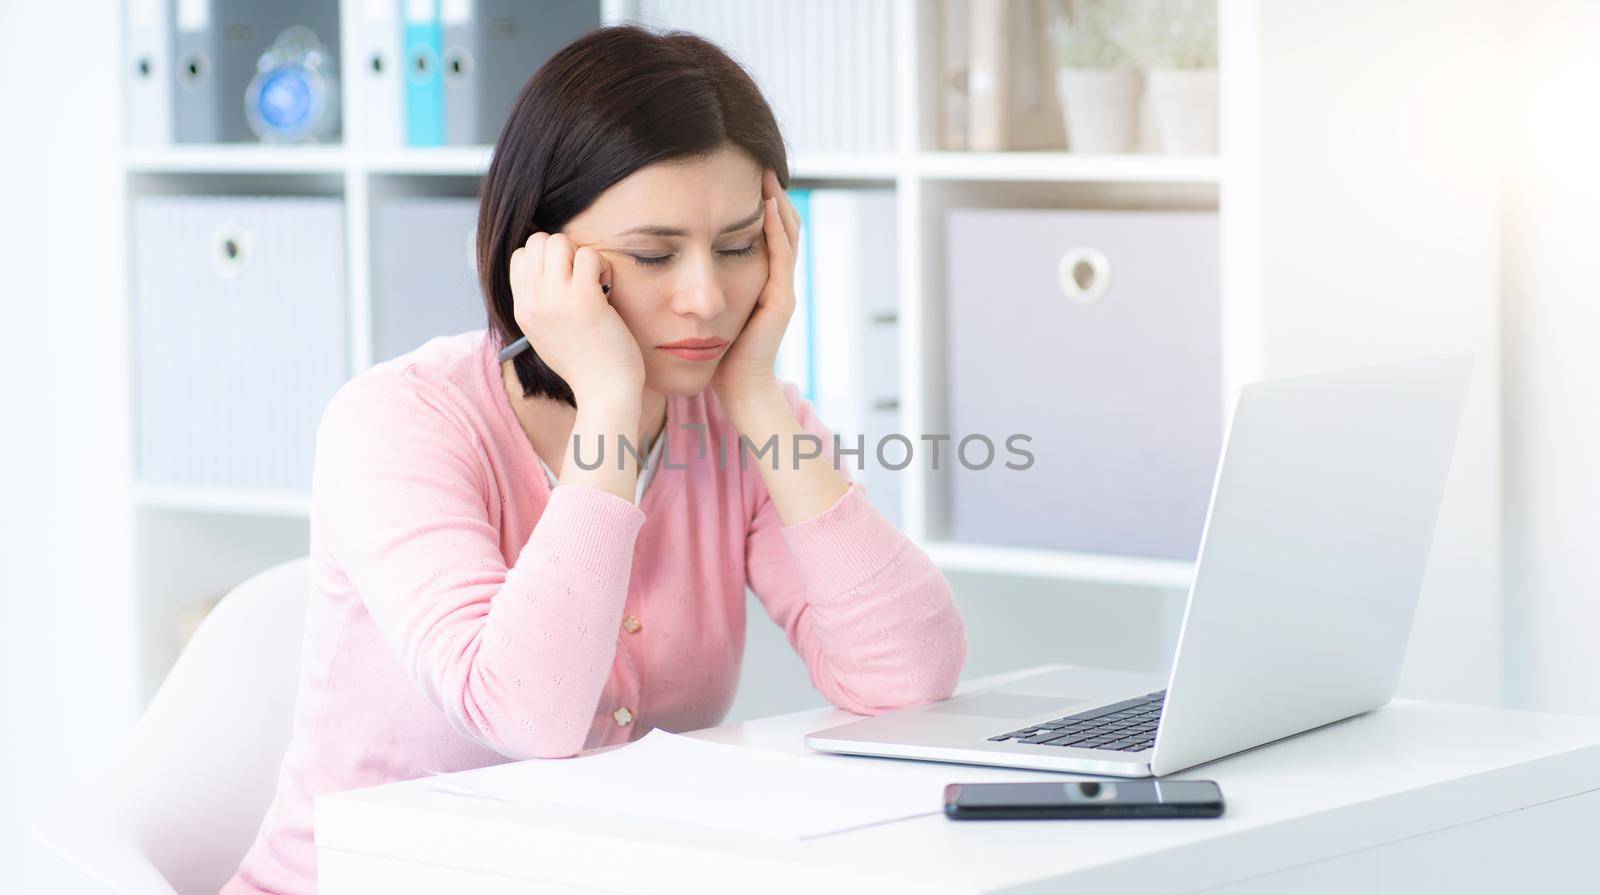 Tired woman at workplace in light office